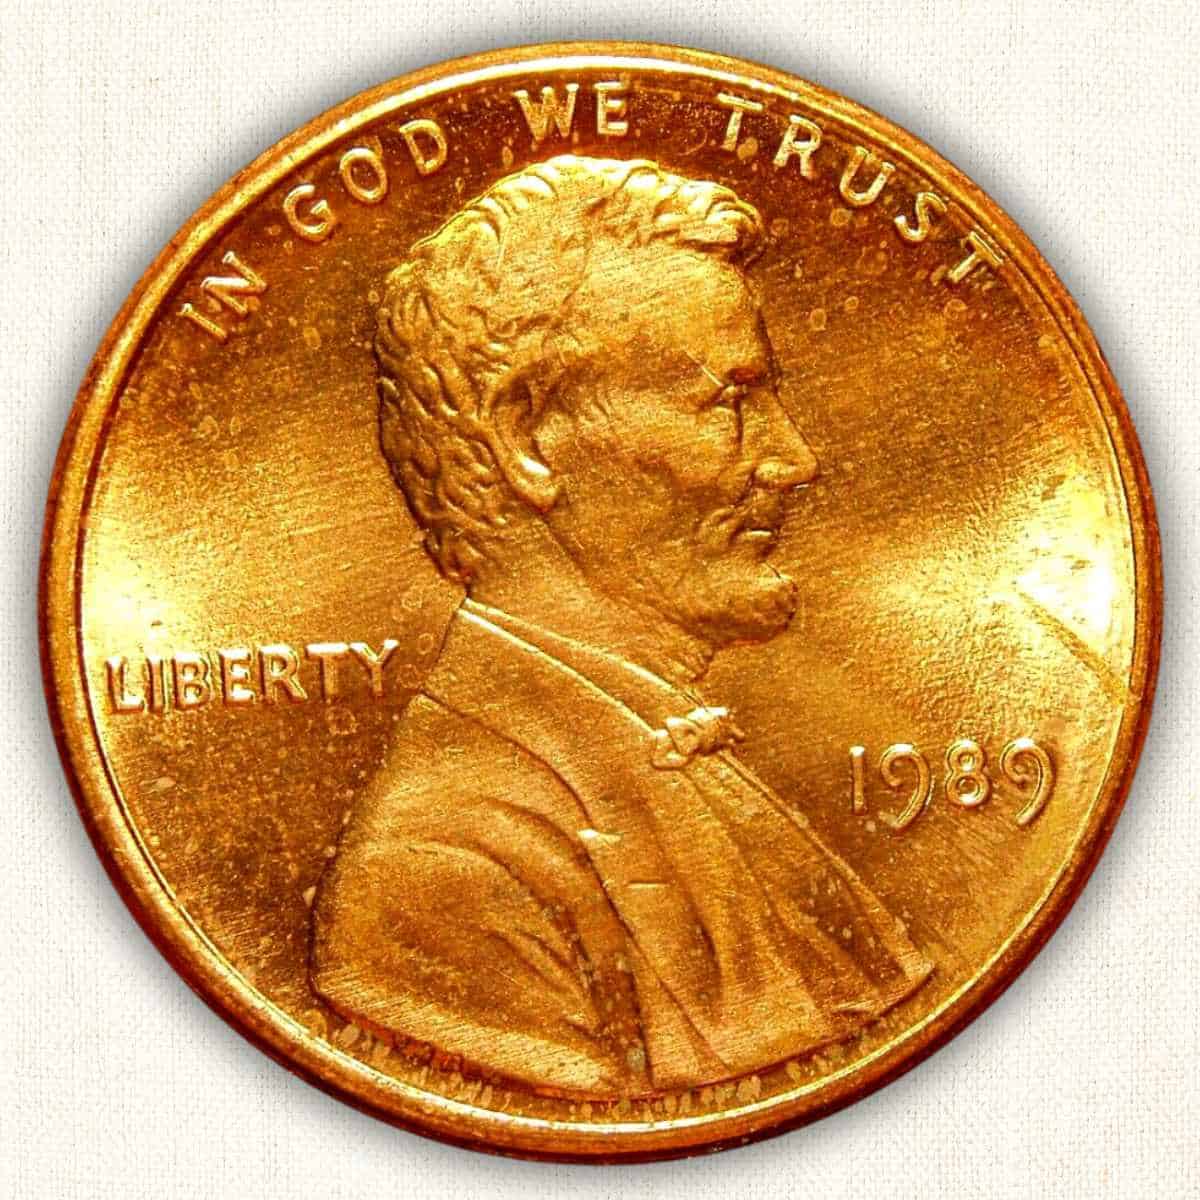 1989 Penny Obverse Features